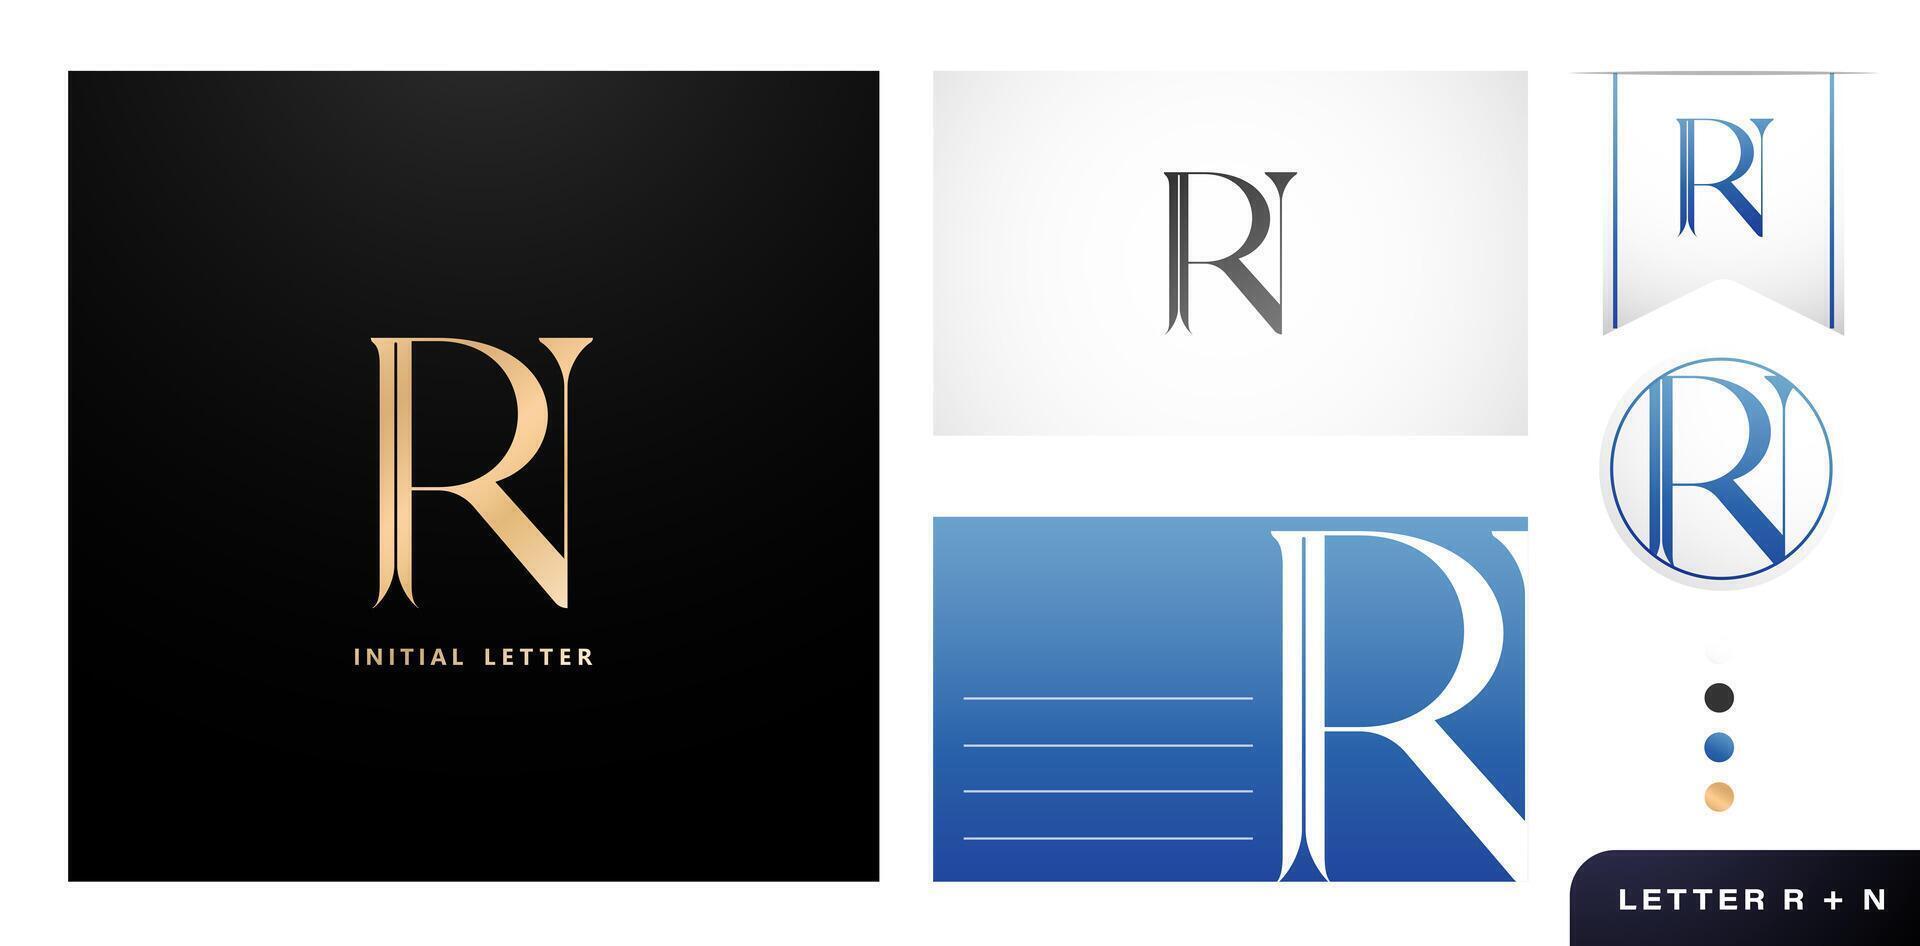 RN monogram lettering fonts with modern letter logo design styles for business cards templates, advertisement material, collage prints, ads campaign marketing, screen printing, letterpress golden foil vector